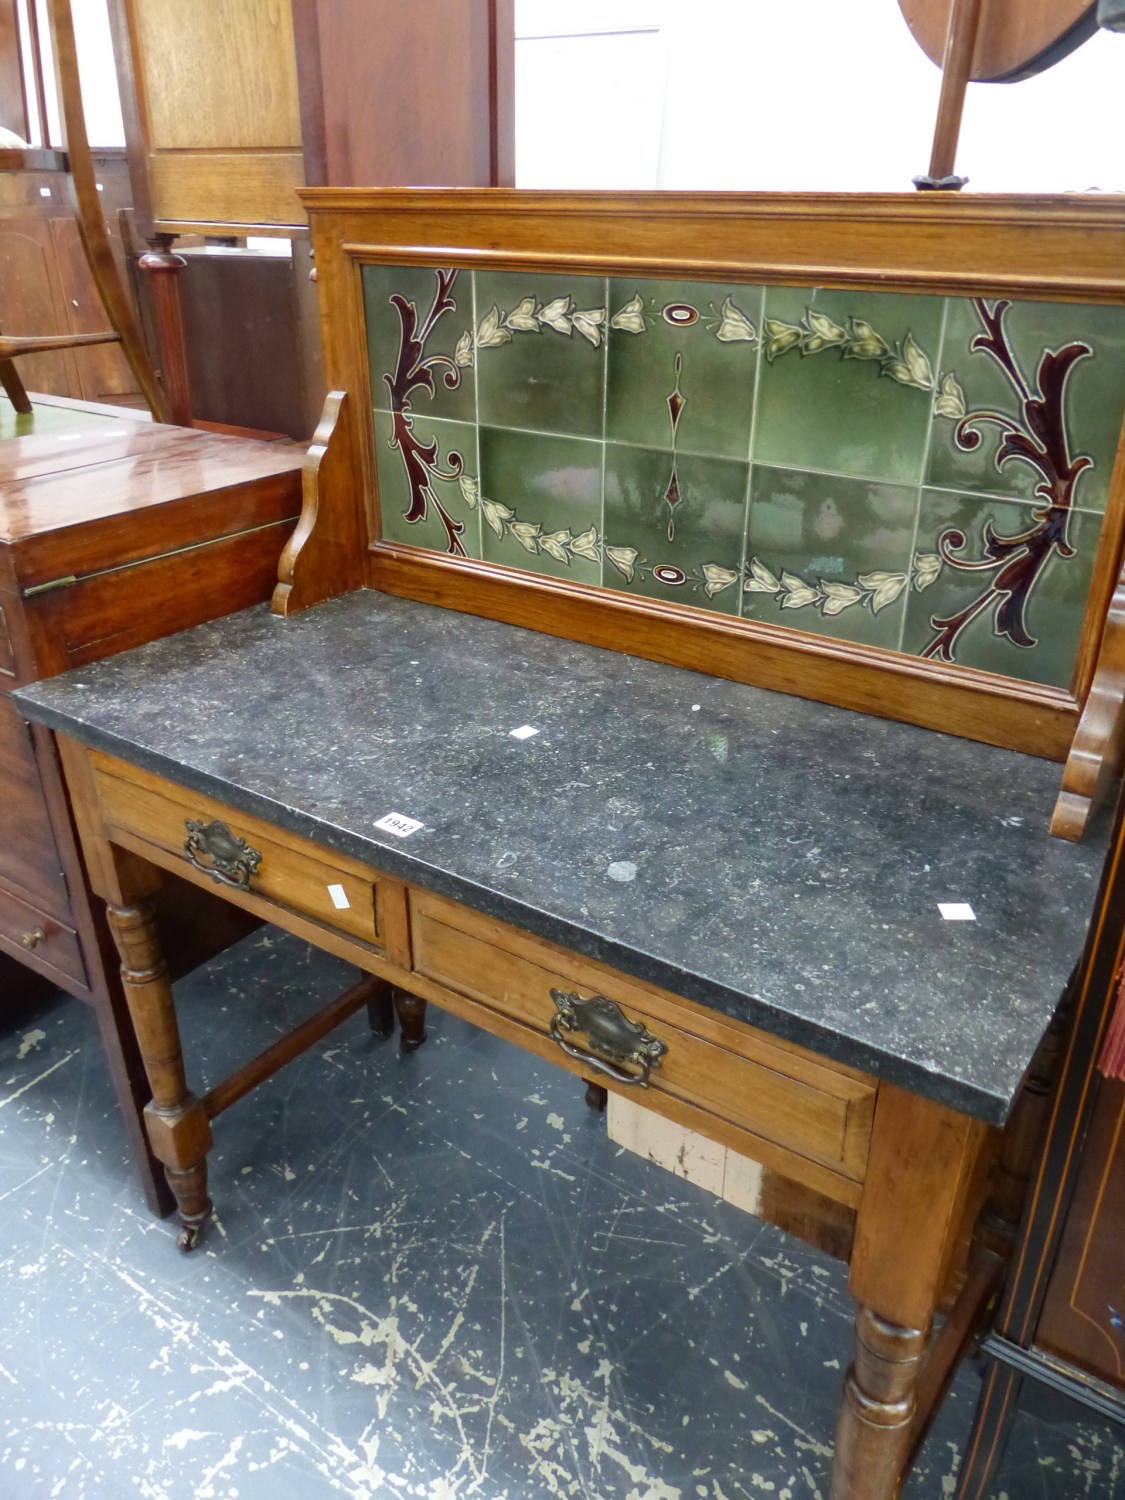 A LATE VICTORIAN TWO DRAWER WASH STAND WITH TILED BACK AND GREY MARBLE TOP. W 92 x D 43 x H 115cms.